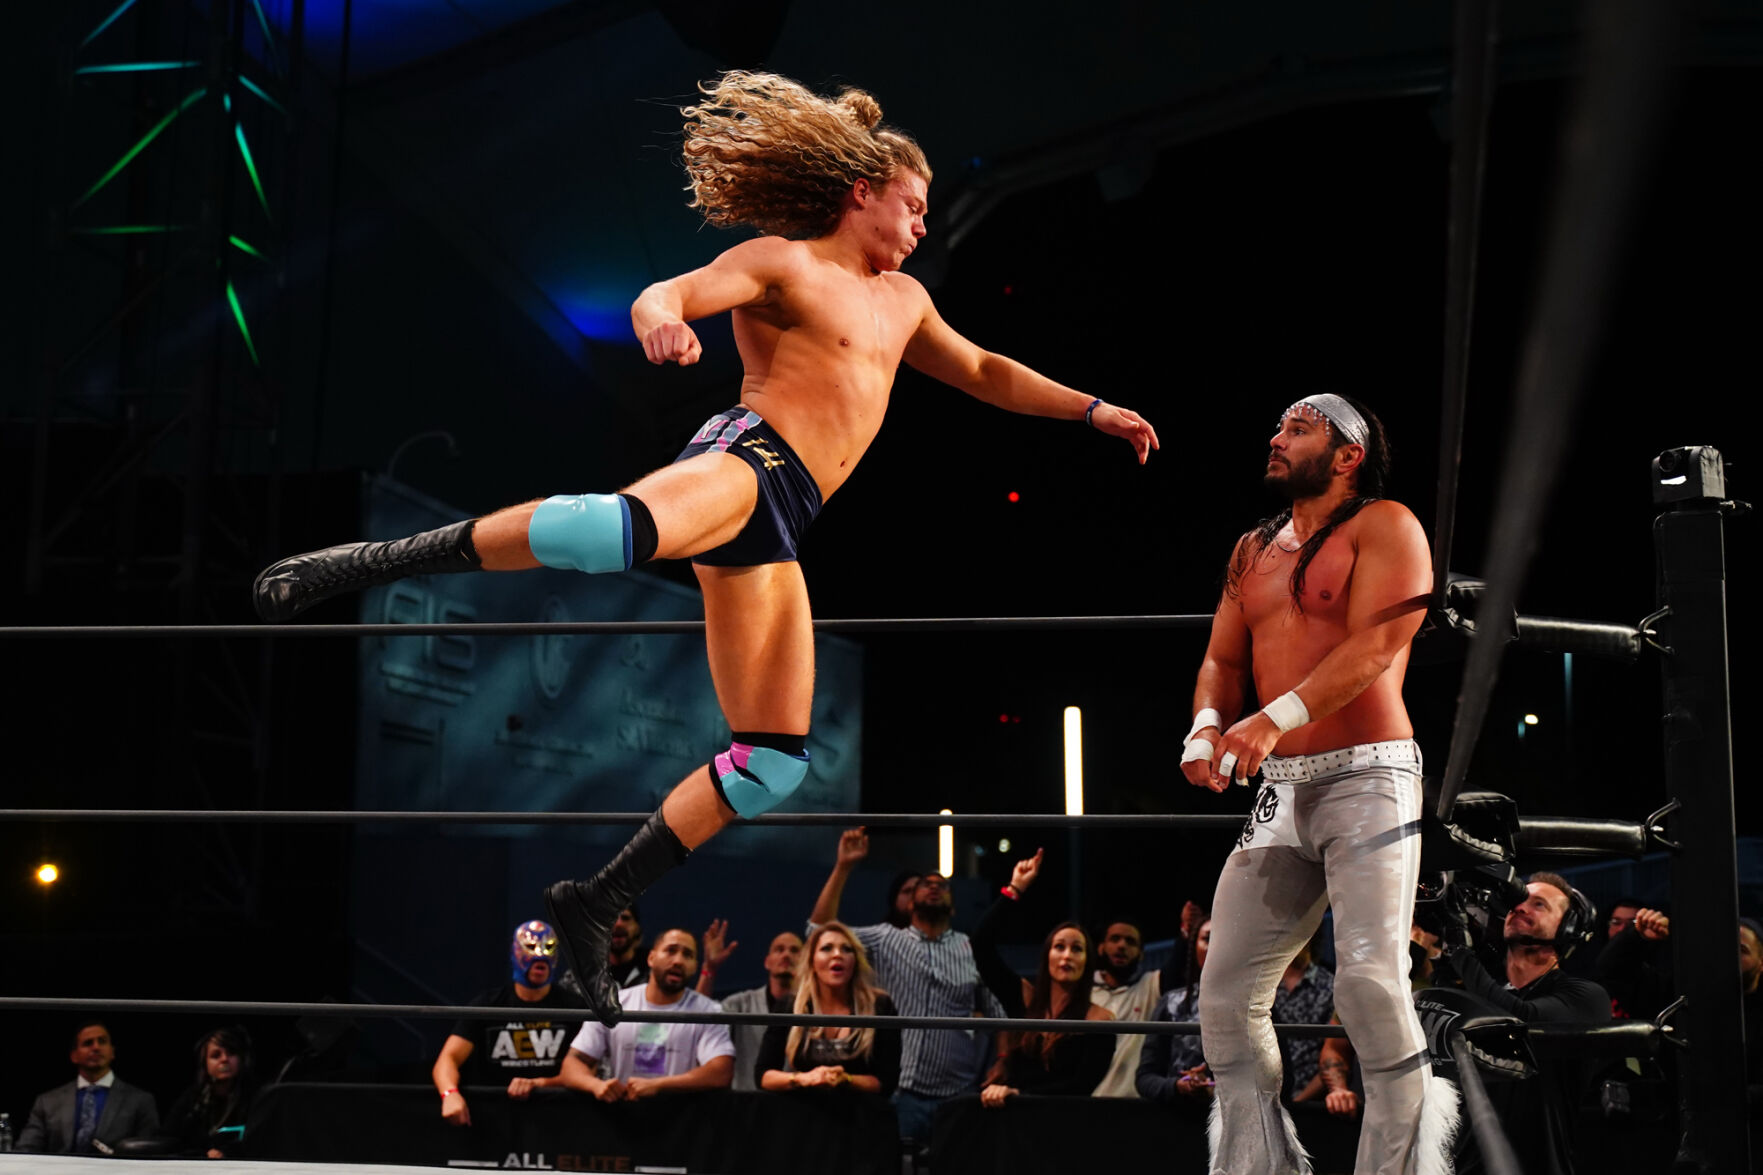 From the Top Rope Triad Wrestler rises to Professional Wrestling fame News yesweekly photo picture